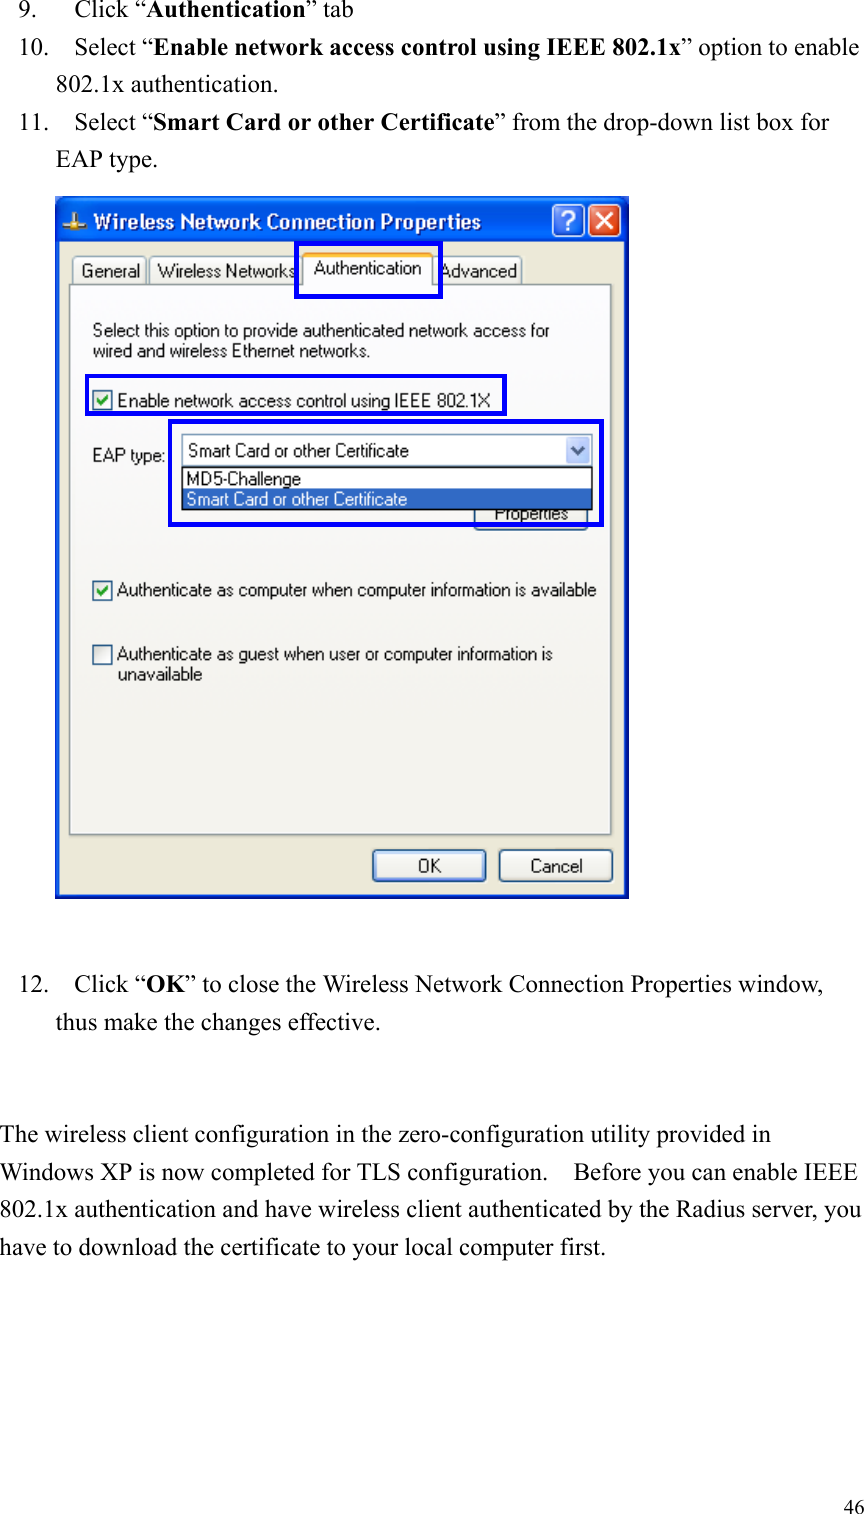 469. Click “Authentication” tab10. Select “Enable network access control using IEEE 802.1x” option to enable802.1x authentication.11. Select “Smart Card or other Certificate” from the drop-down list box forEAP type.12. Click “OK” to close the Wireless Network Connection Properties window,thus make the changes effective.The wireless client configuration in the zero-configuration utility provided inWindows XP is now completed for TLS configuration.    Before you can enable IEEE802.1x authentication and have wireless client authenticated by the Radius server, youhave to download the certificate to your local computer first.